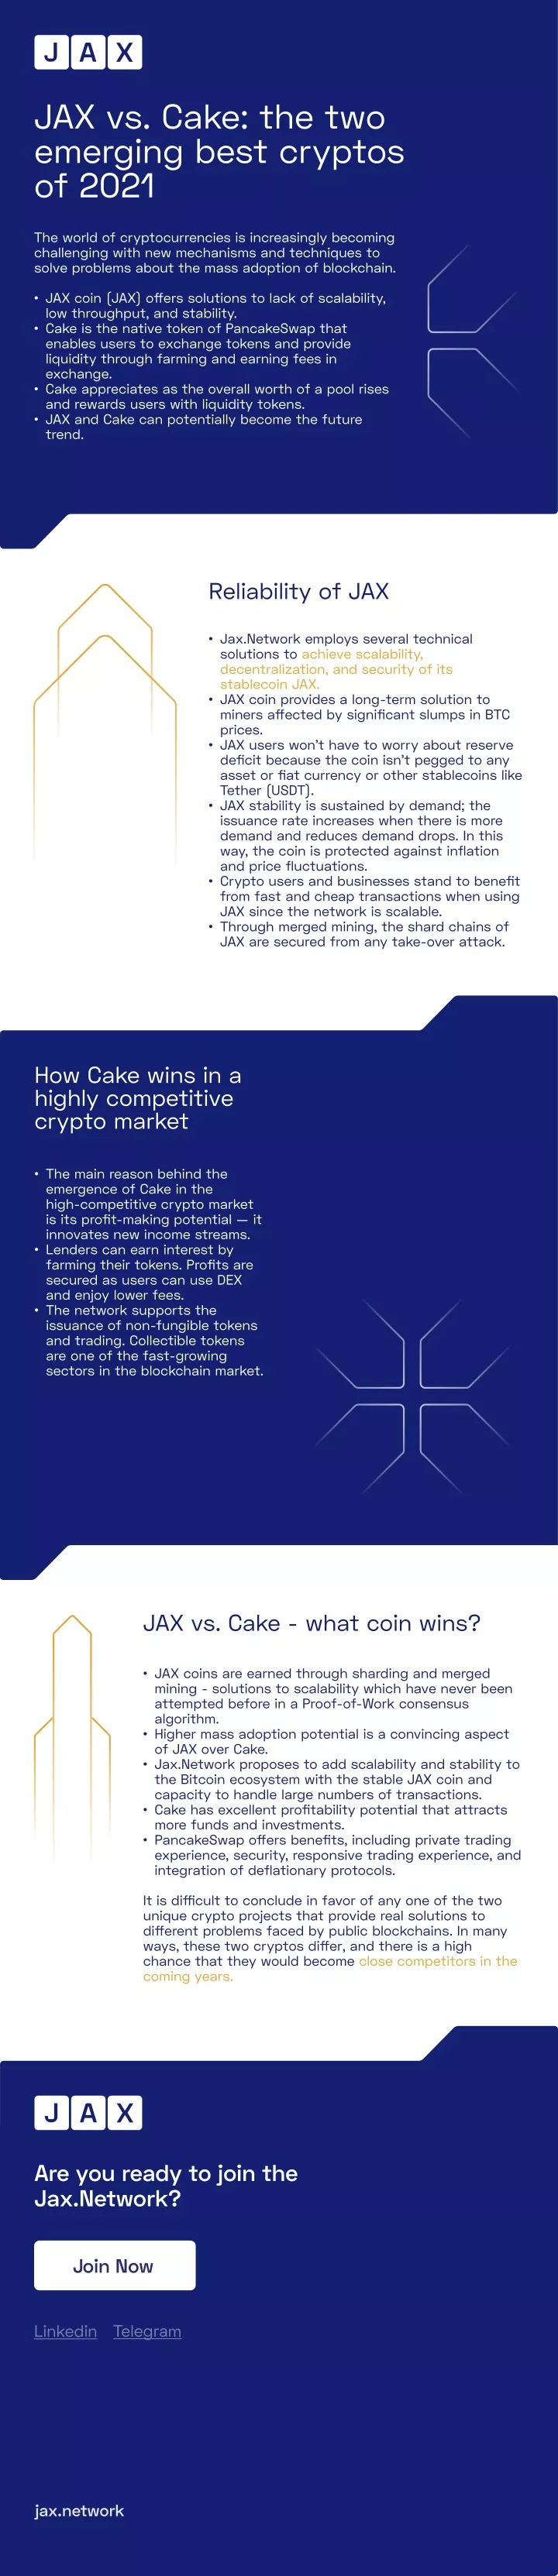 jax vs cake the two emerging best cryptos of 2021